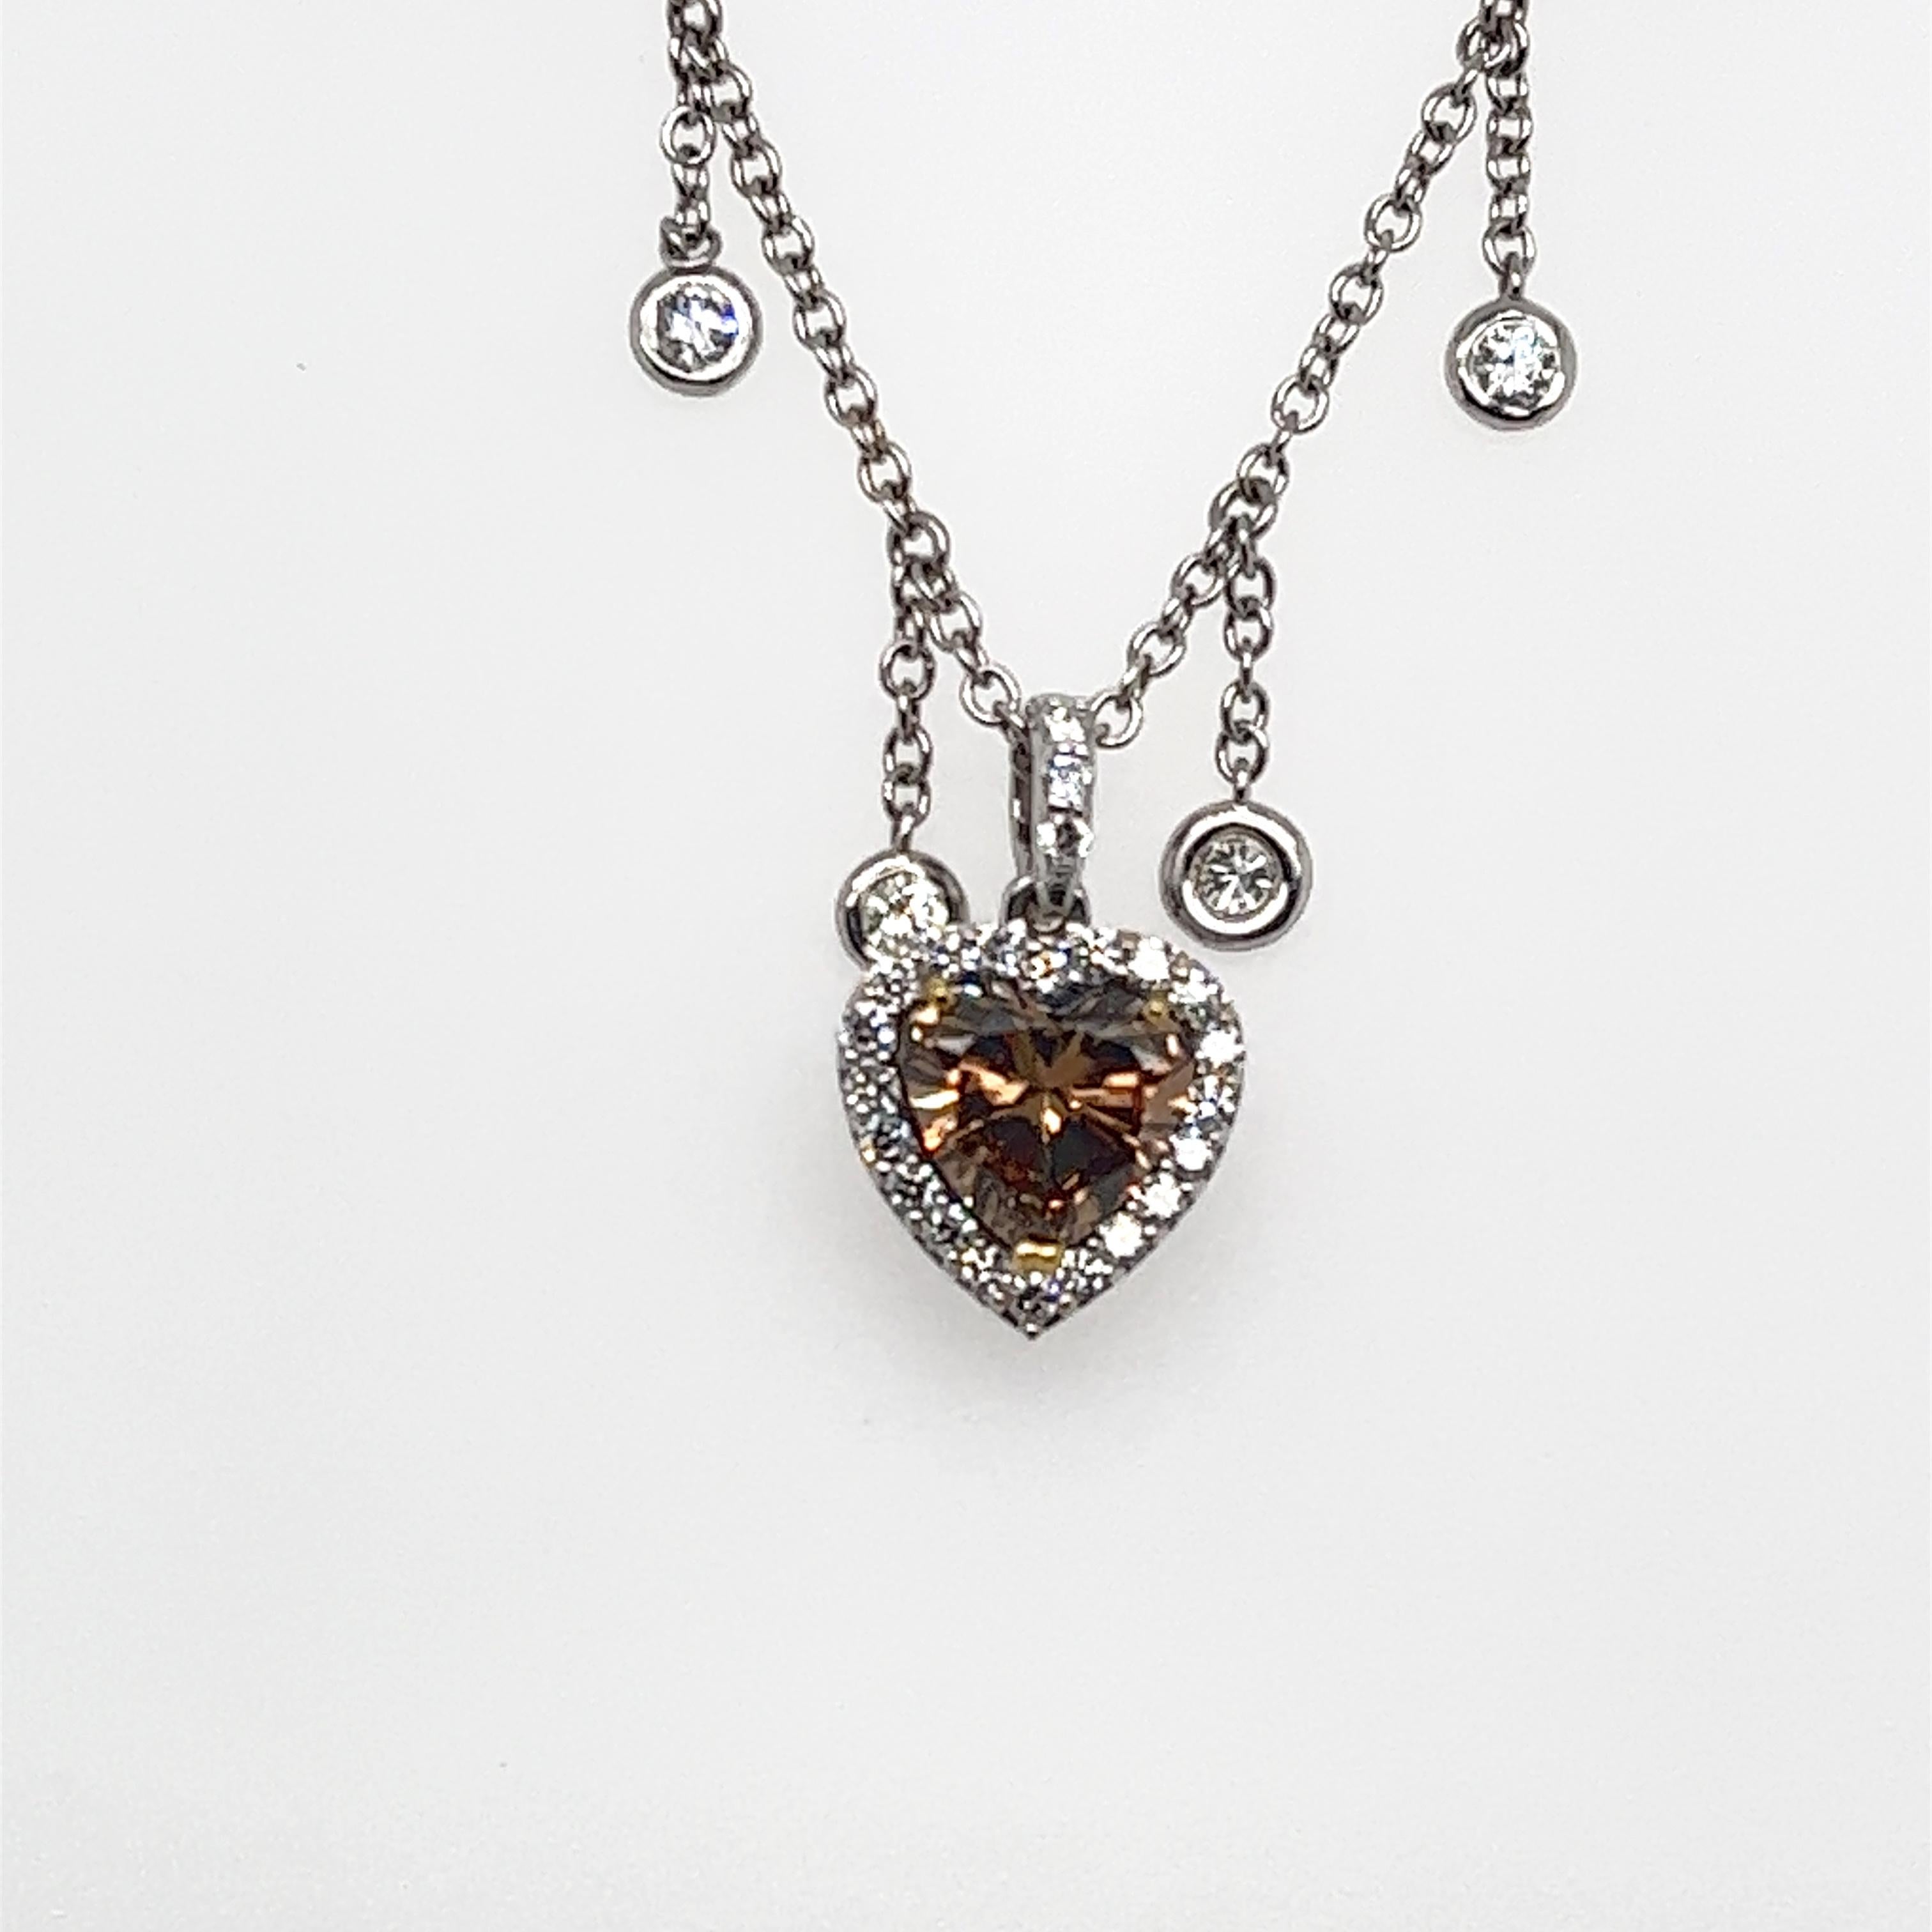 Contemporary G.I.A. Diamond Heart Pendant on Diamond by the Yard Chain in 18kt Gold